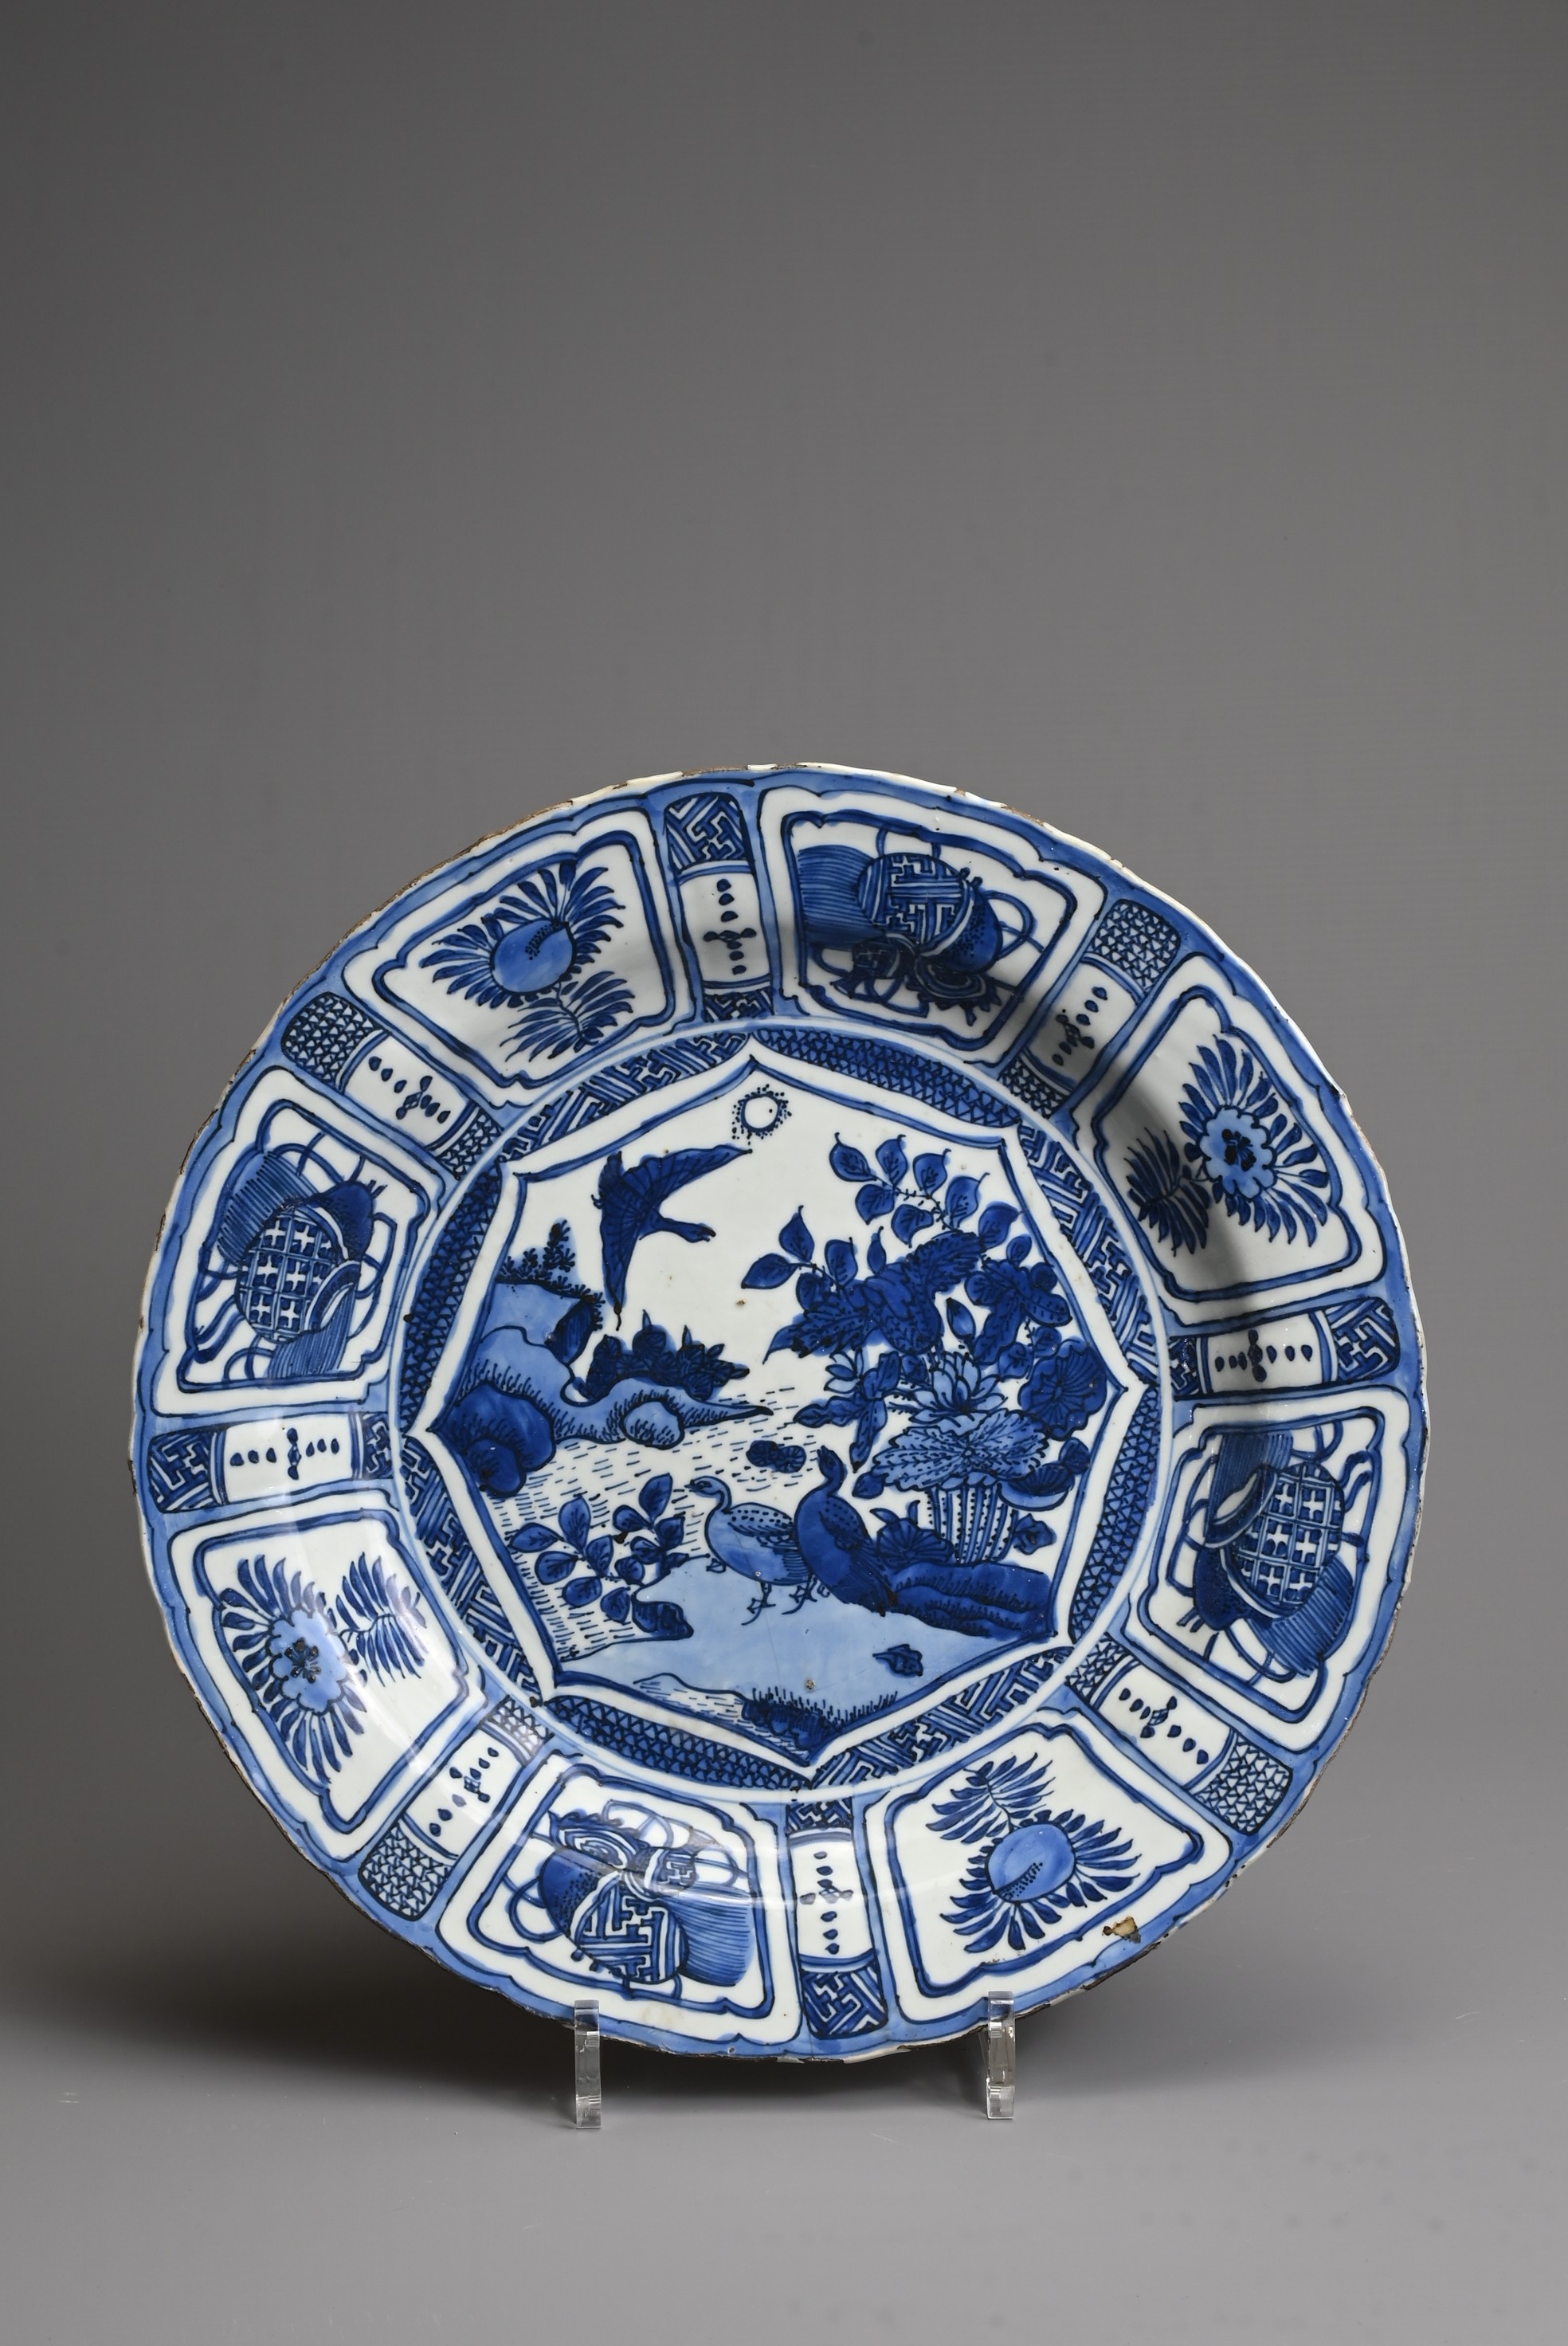 A CHINESE BLUE AND WHITE PORCELAIN KRAAK DISH, MING DYNASTY. Decorated with ducks at a lotus pond